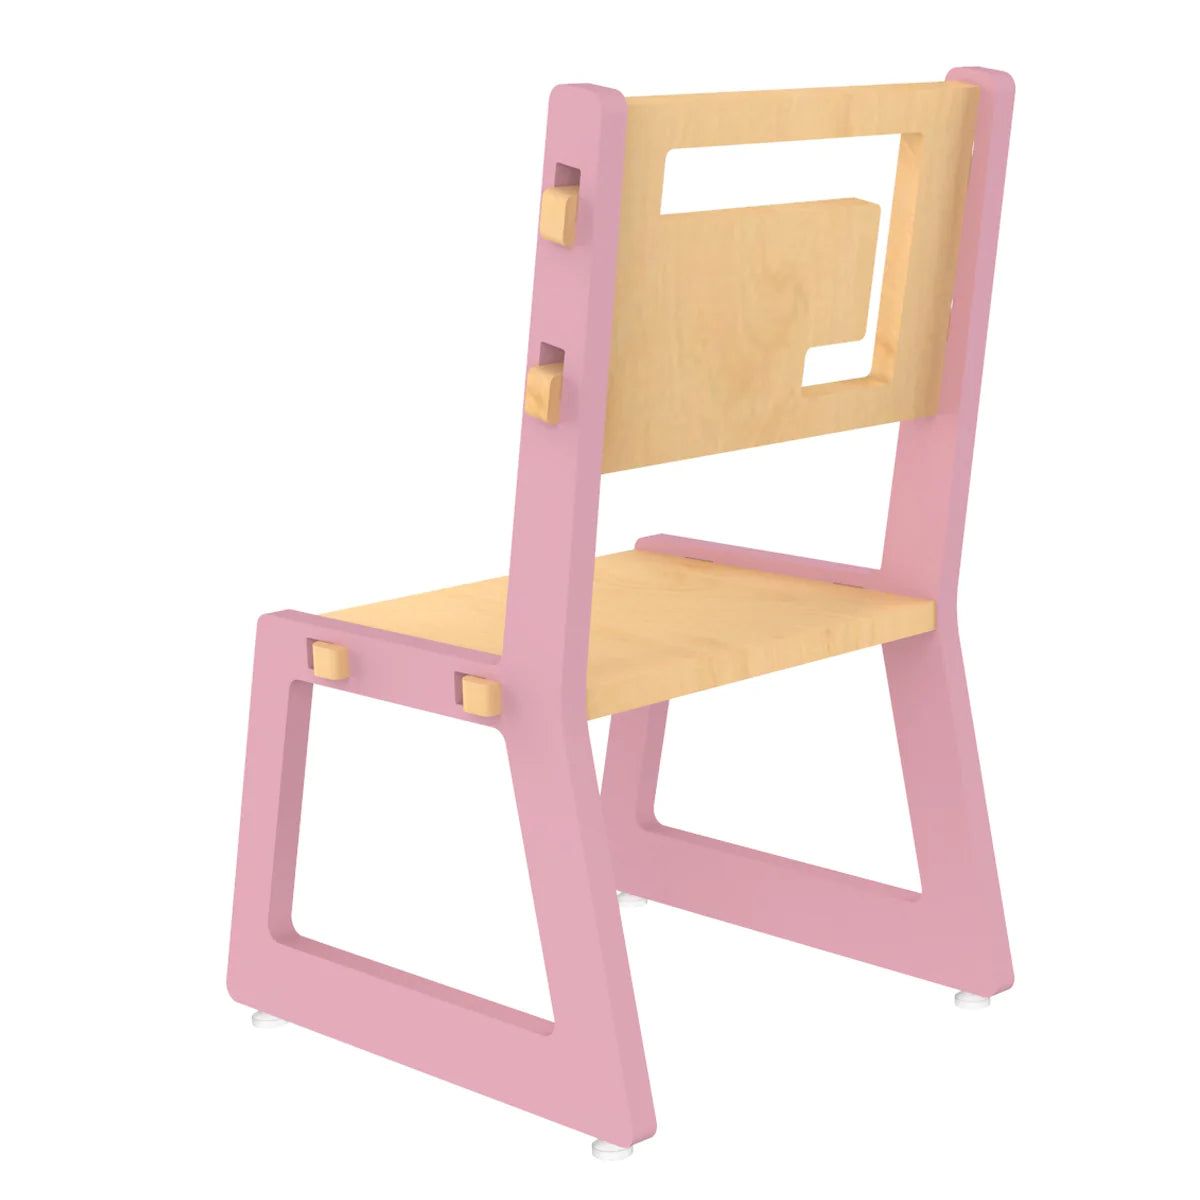 Buy Blue Apple Wooden Chair - Pink - Back View - SkilloToys.com